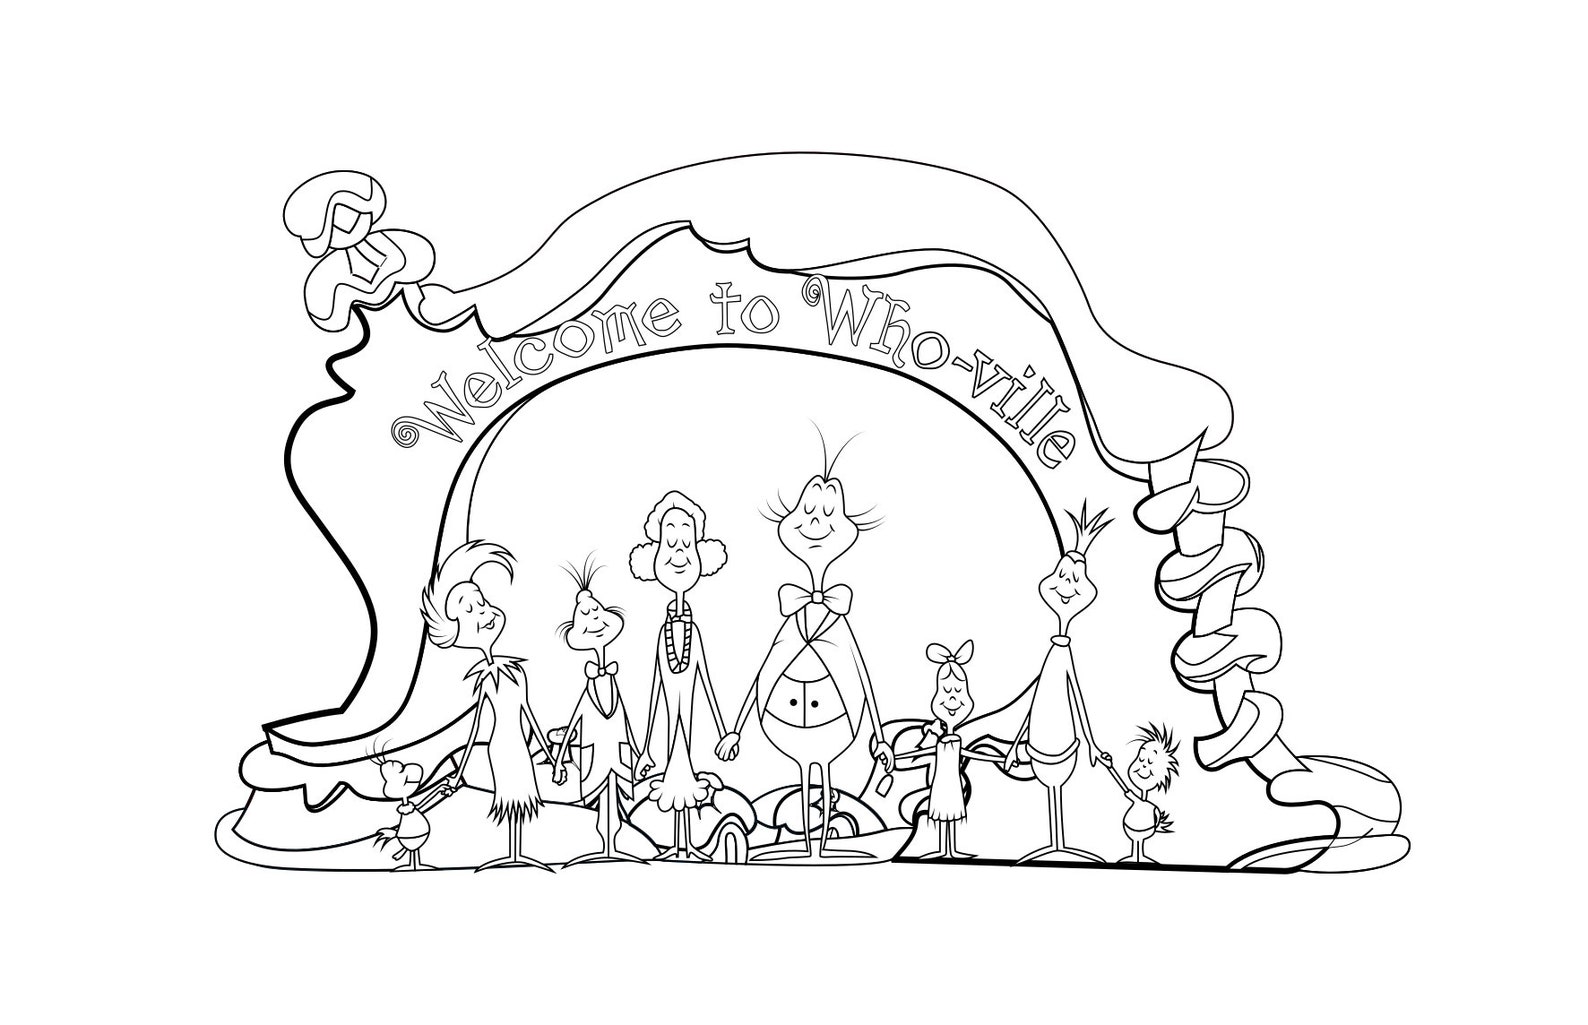 Coloring Page / Life Size Whoville Whos People / Houses / - Etsy